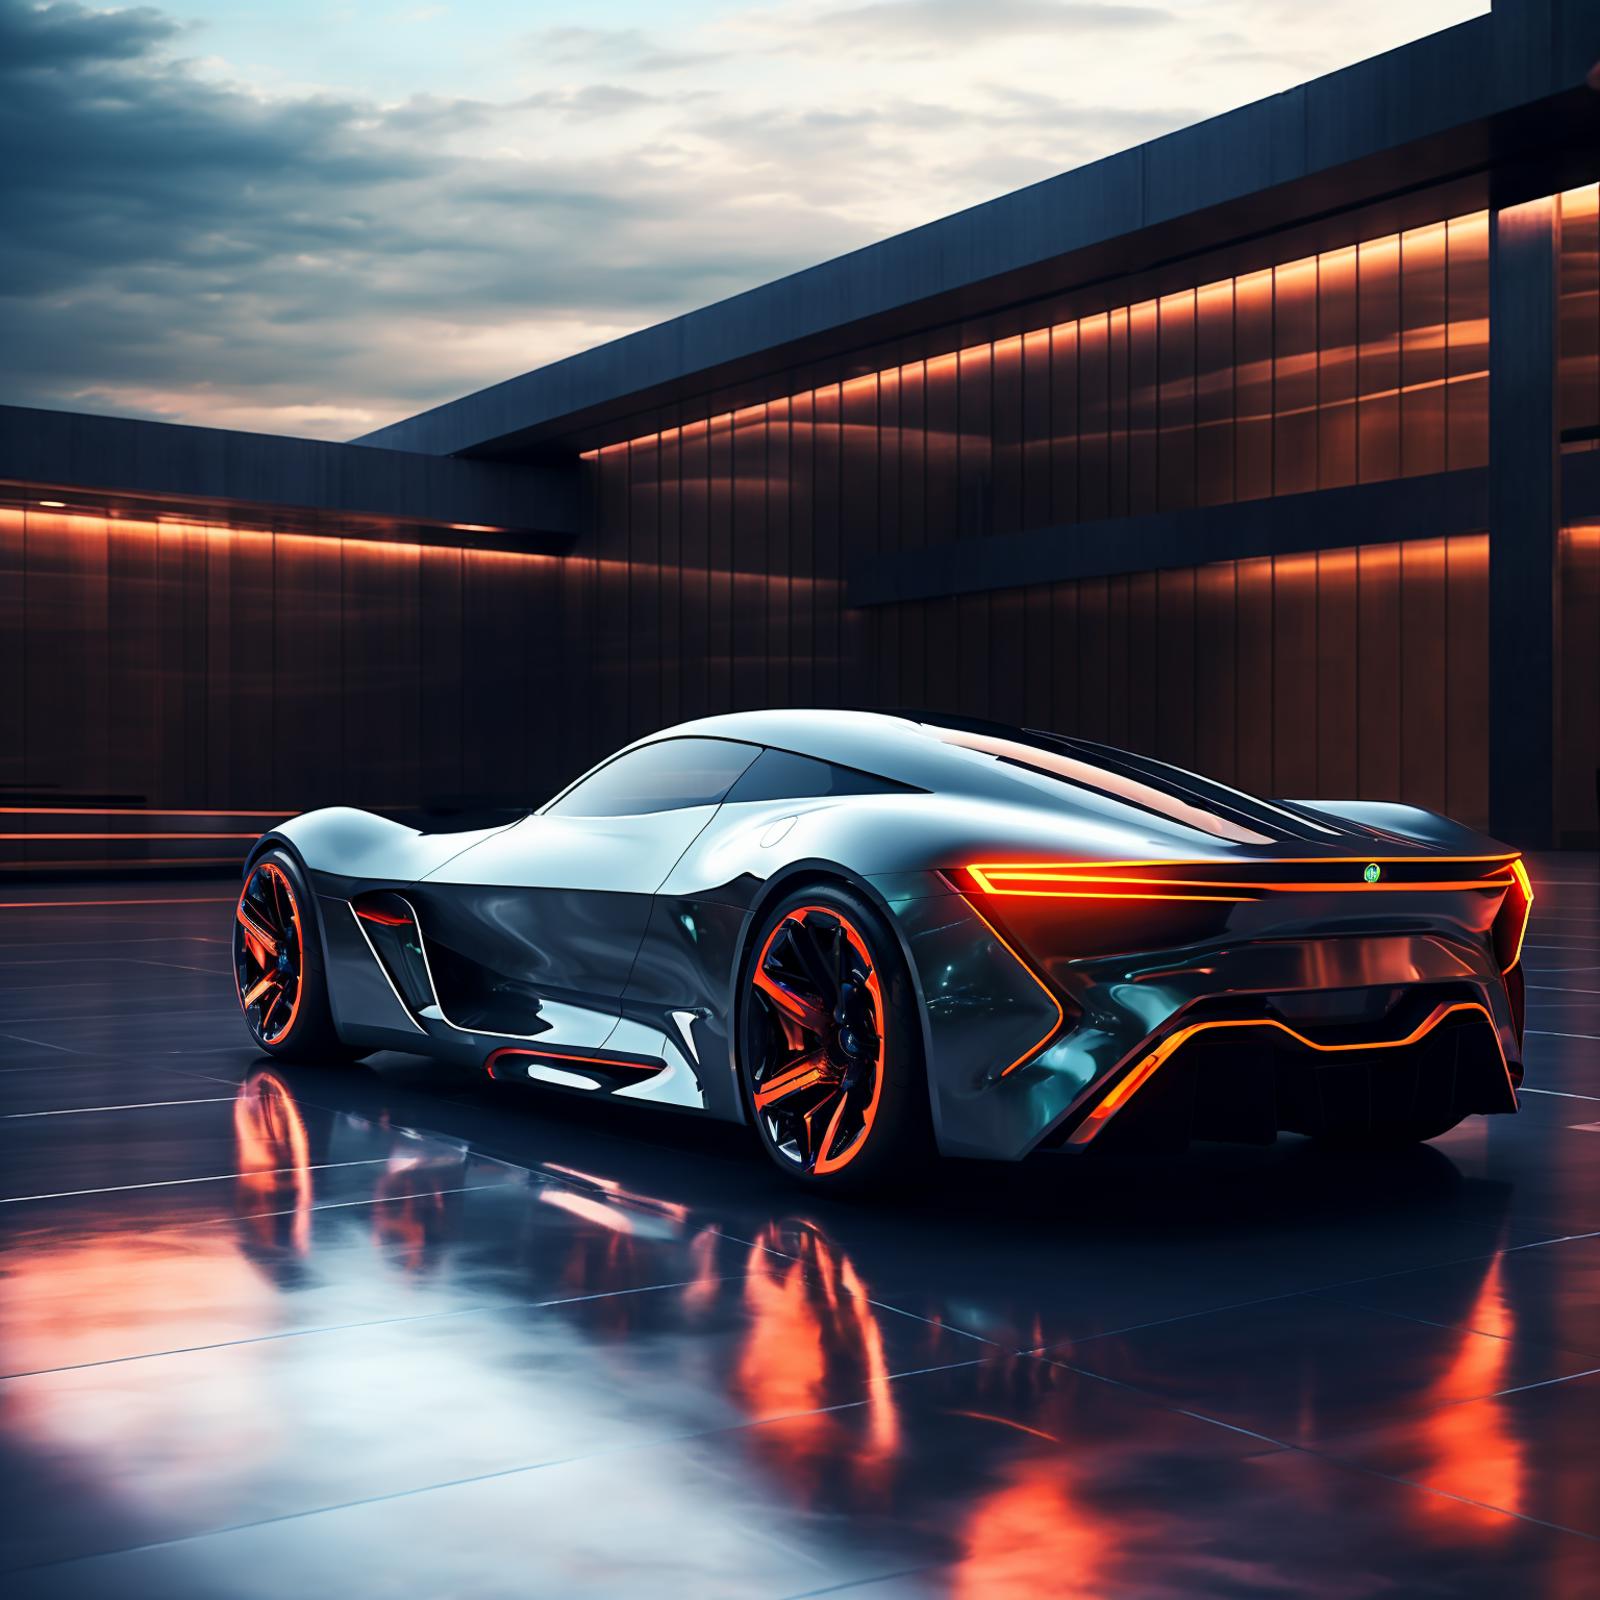 Future Concept Vehicle Styling｜Automotive Exterior Design image by KeironDesigner